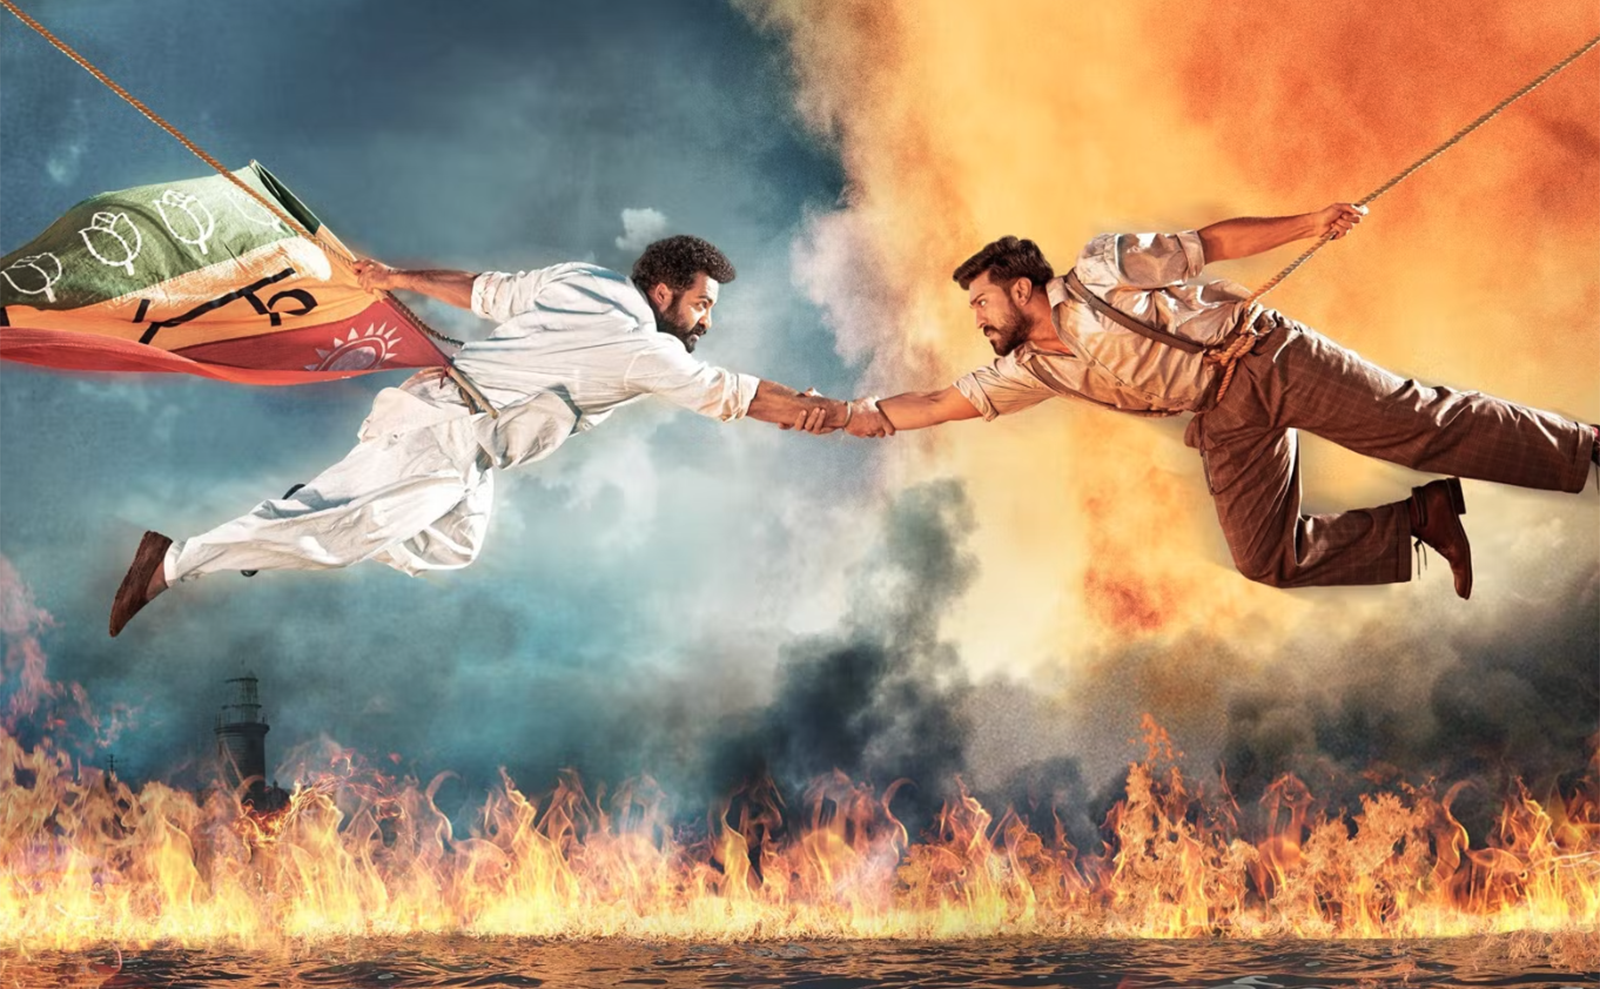  the two male stars of the movie rrr flying through the air while shaking hands with flames burning beneath them